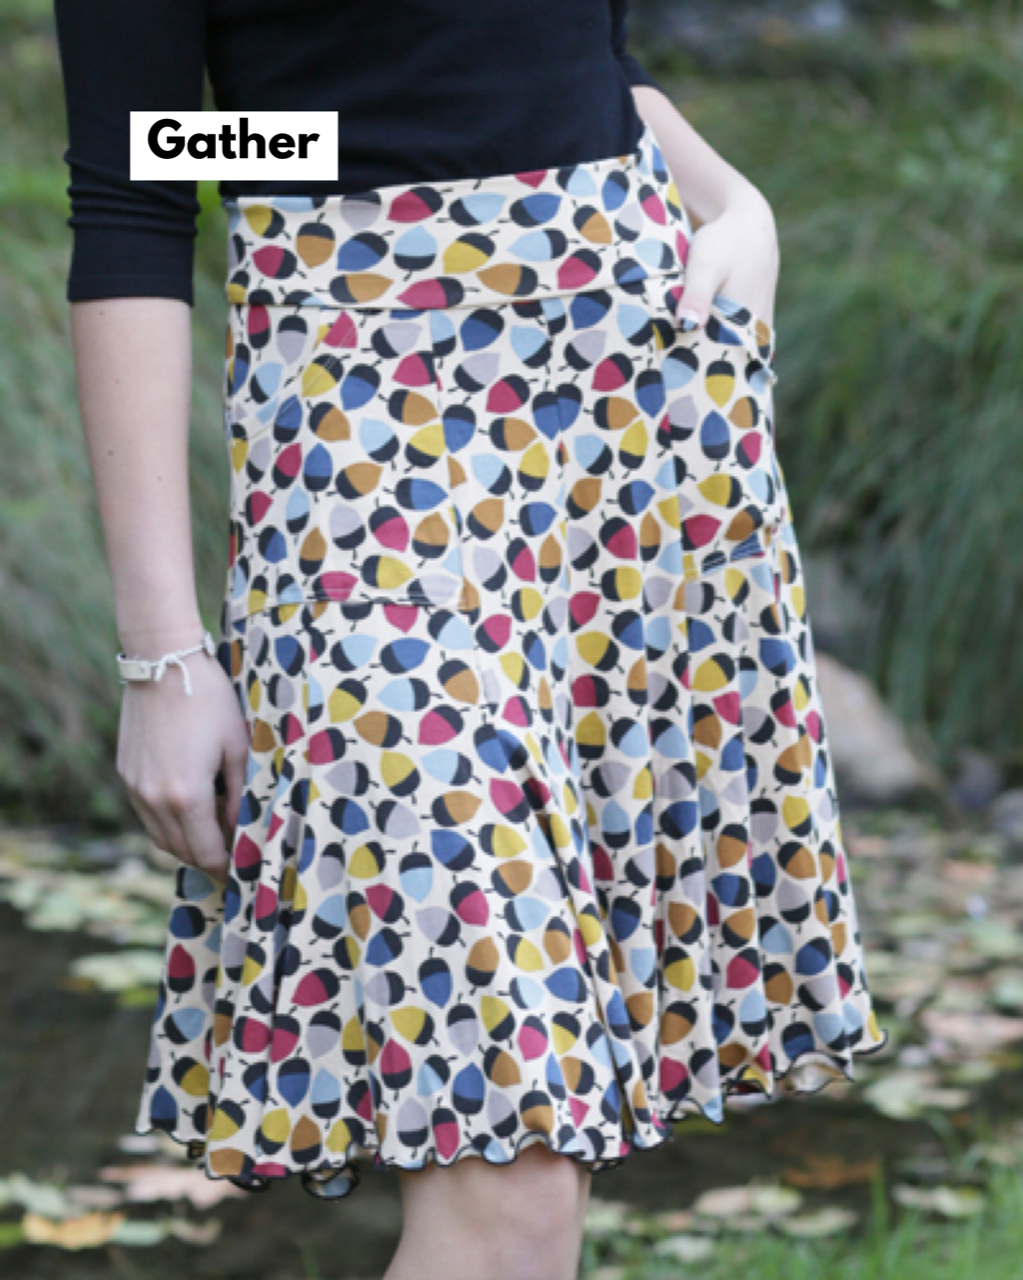 Effie's Heart 7 Year Skirt in Gather Print & Solid Black